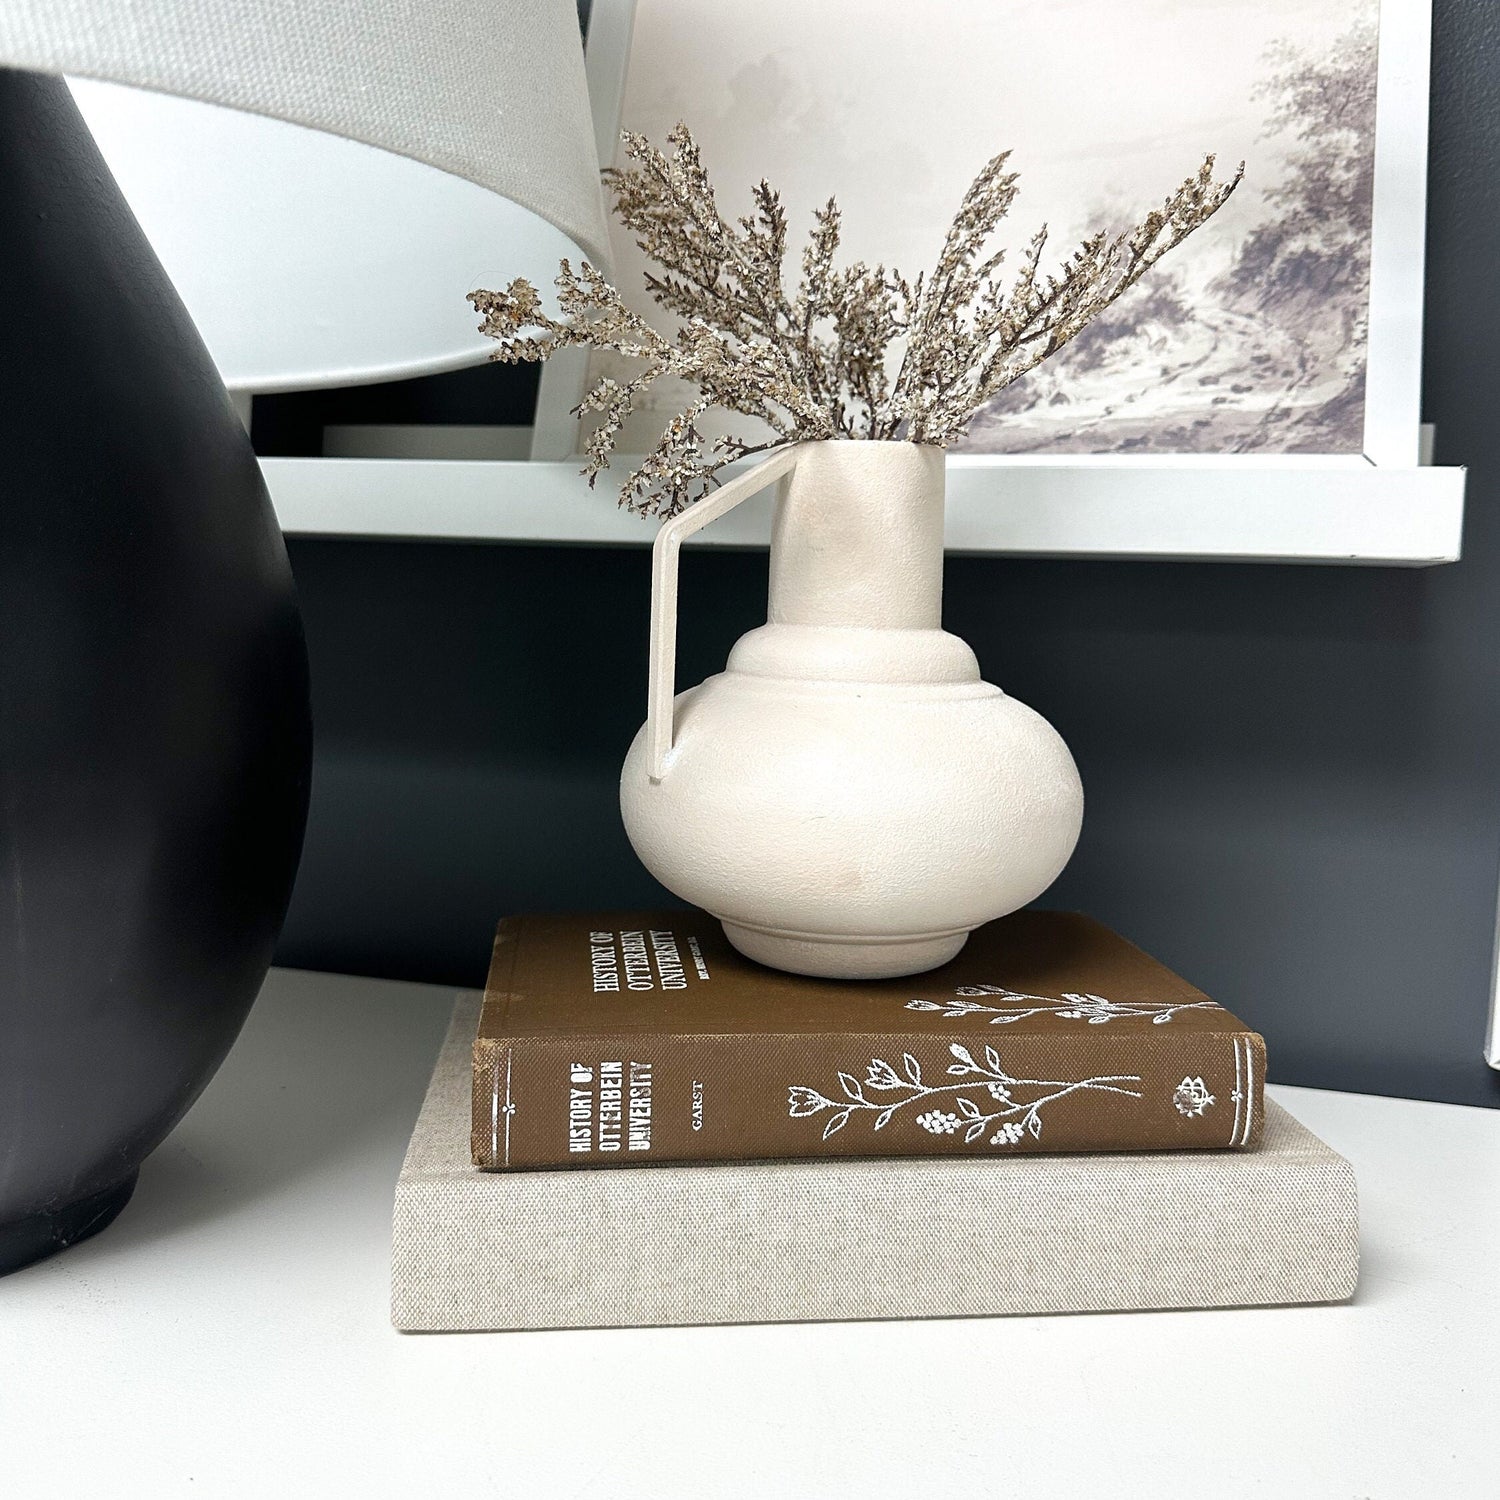 Decorative Books for Home Decor, Books by Color, Books by the Foot, Shelf Decor